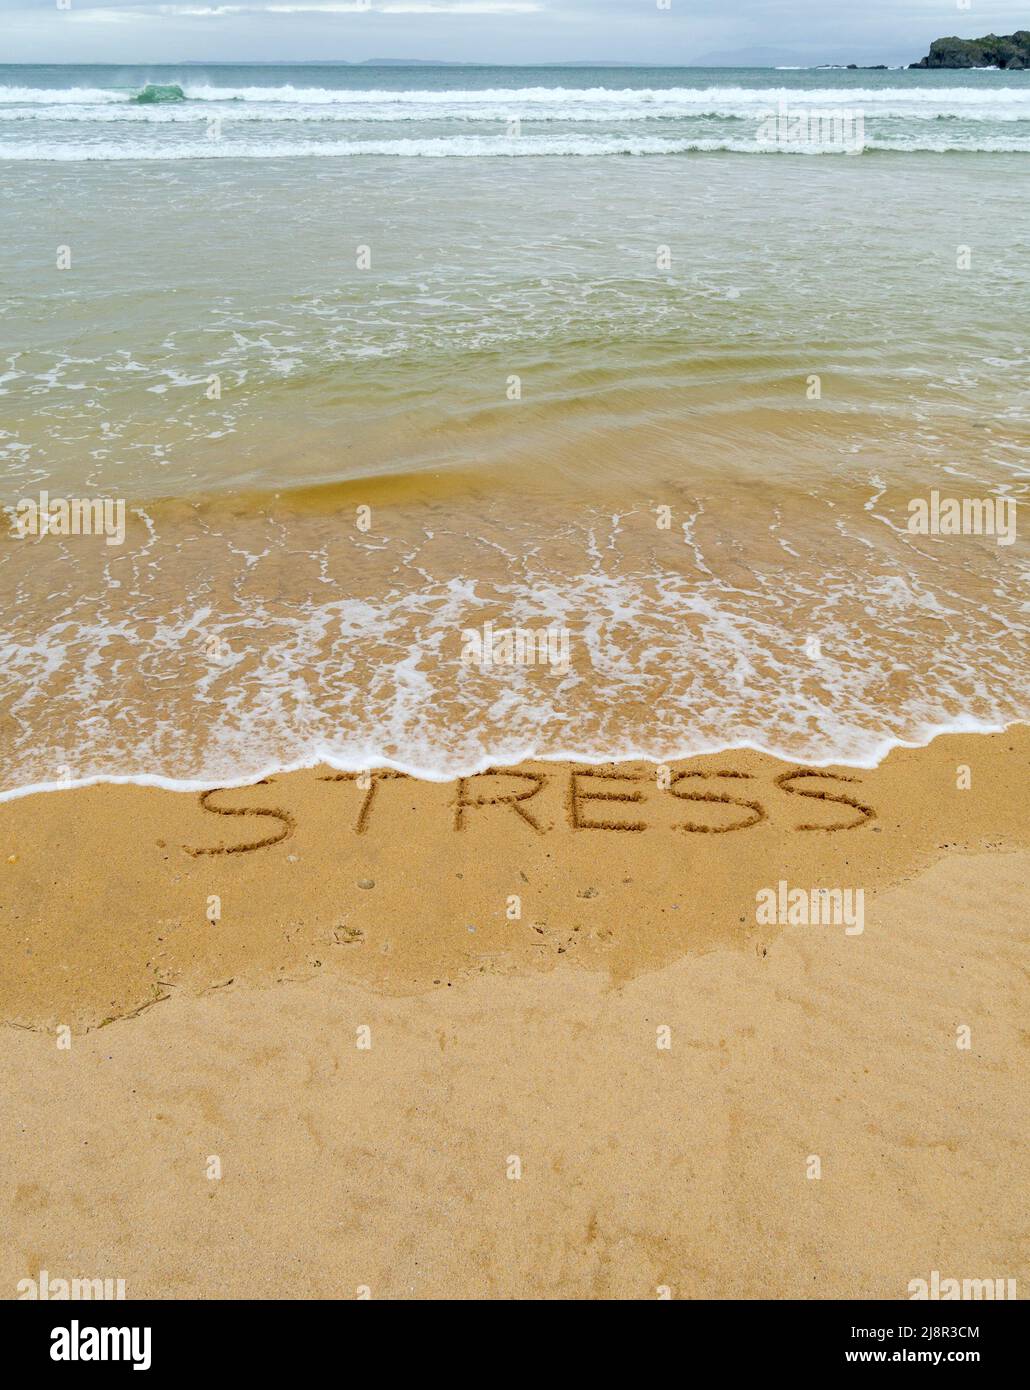 Concept image - to illustrate washing away stress by taking a vacation as waves on a sandy beach wash away the word 'stress' written in sand. Stock Photo